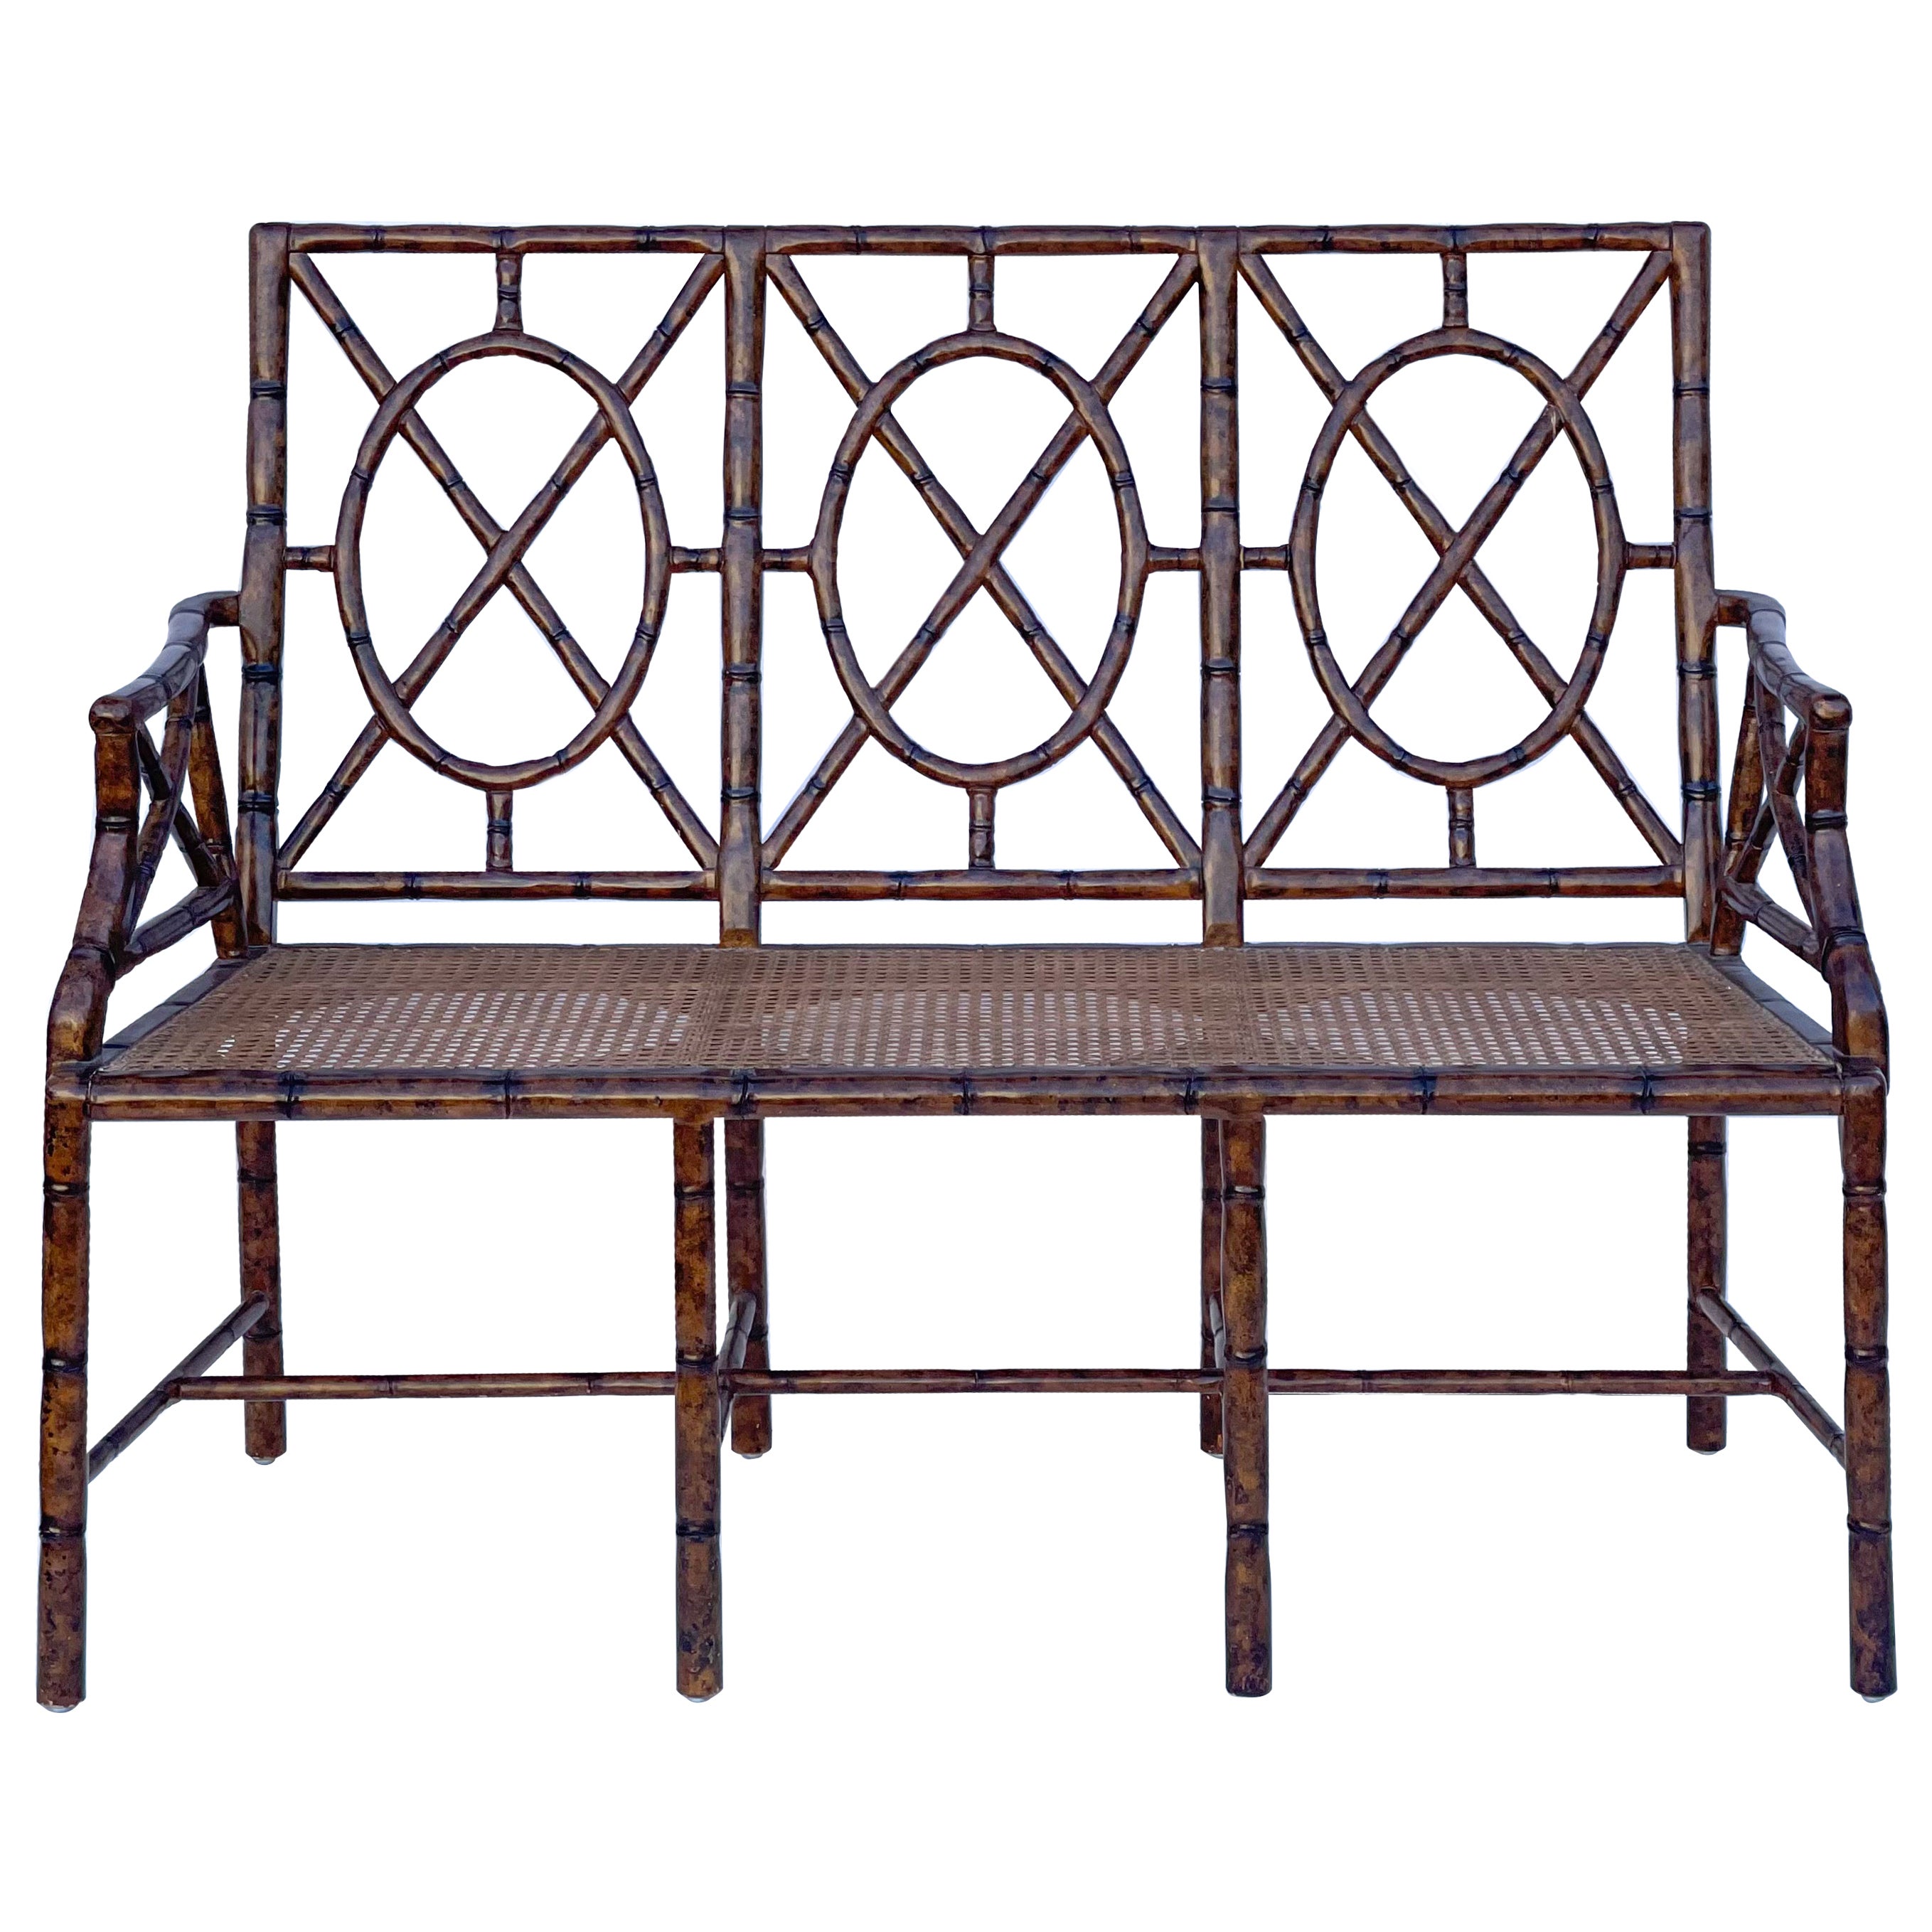 Regency Style Faux Bamboo Bench or Settee with a Faux Tortoise Finish